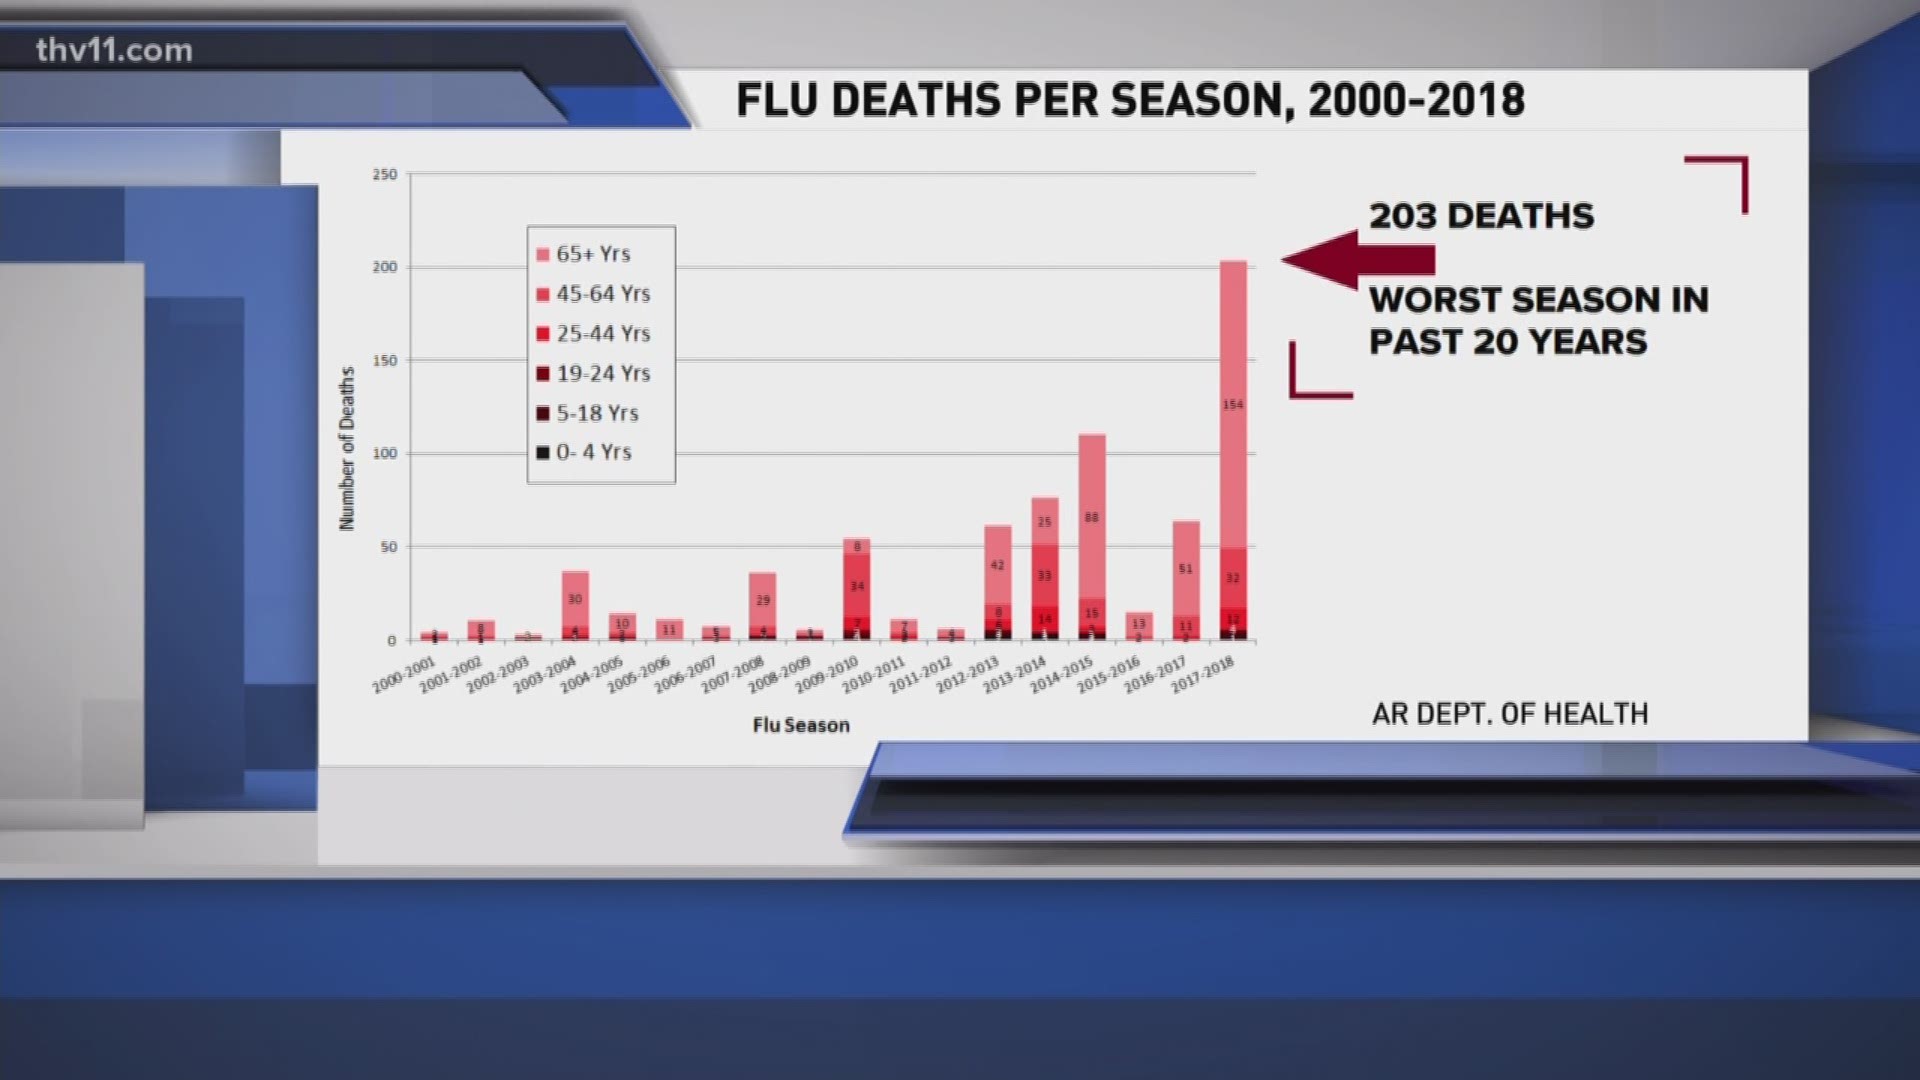 Flu-related deaths rises to 203 in Arkansas